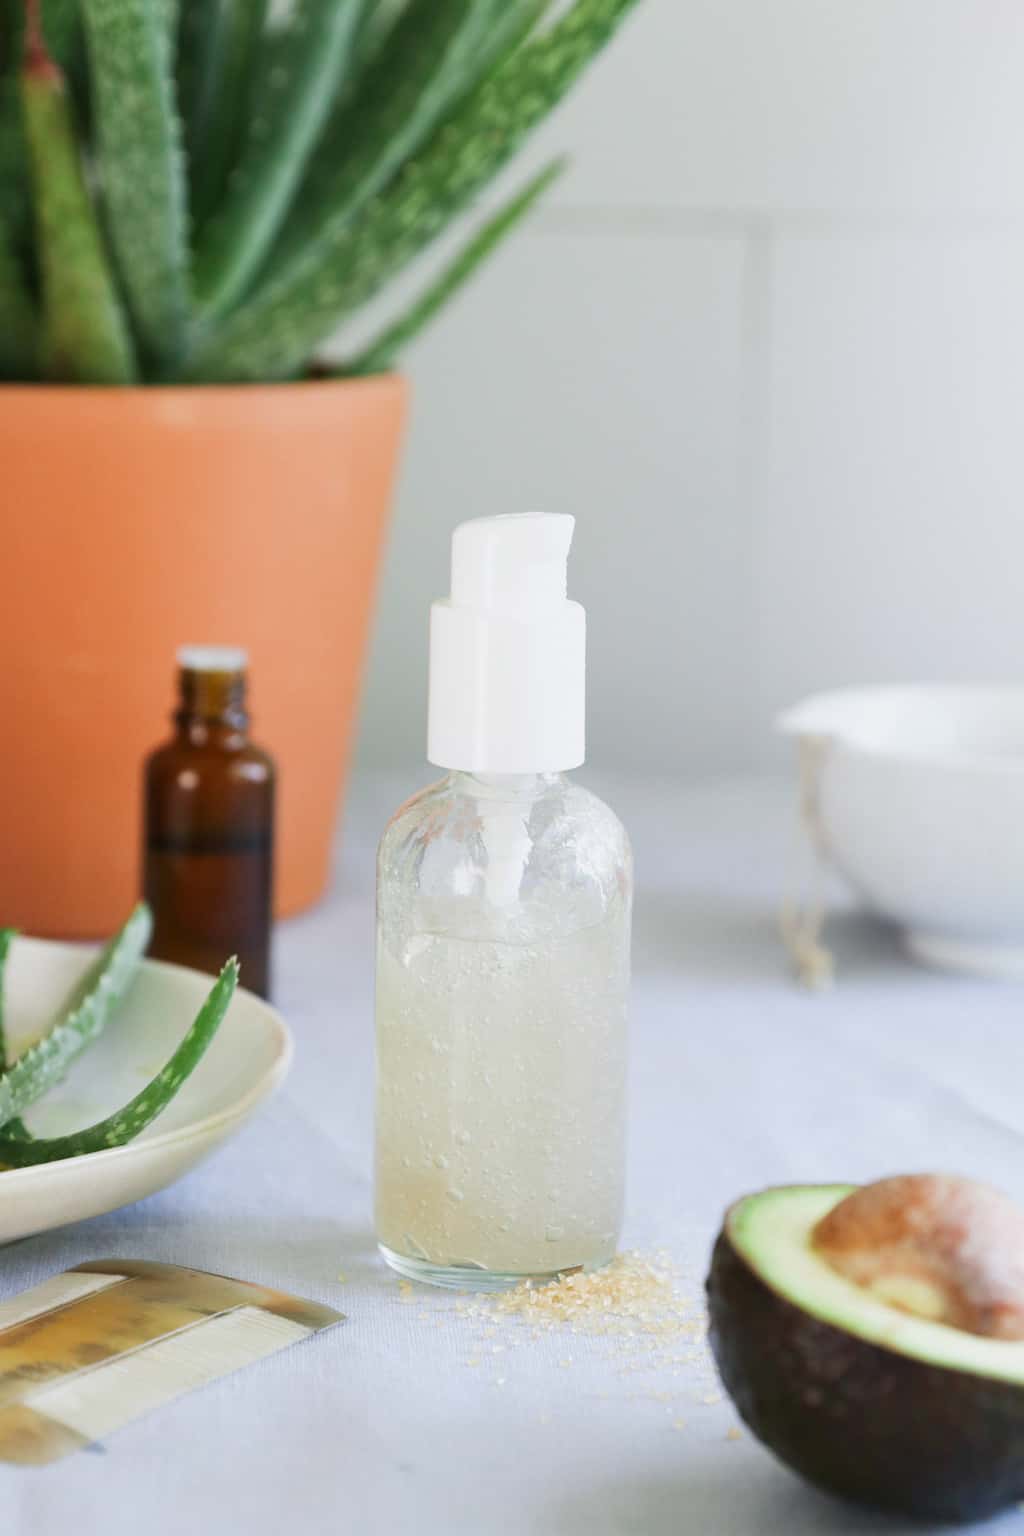 Aloe vera nourishes hair, softens strands and even helps tackle dandruff, making it the perfect base for this homemade aloe hair gel recipe.